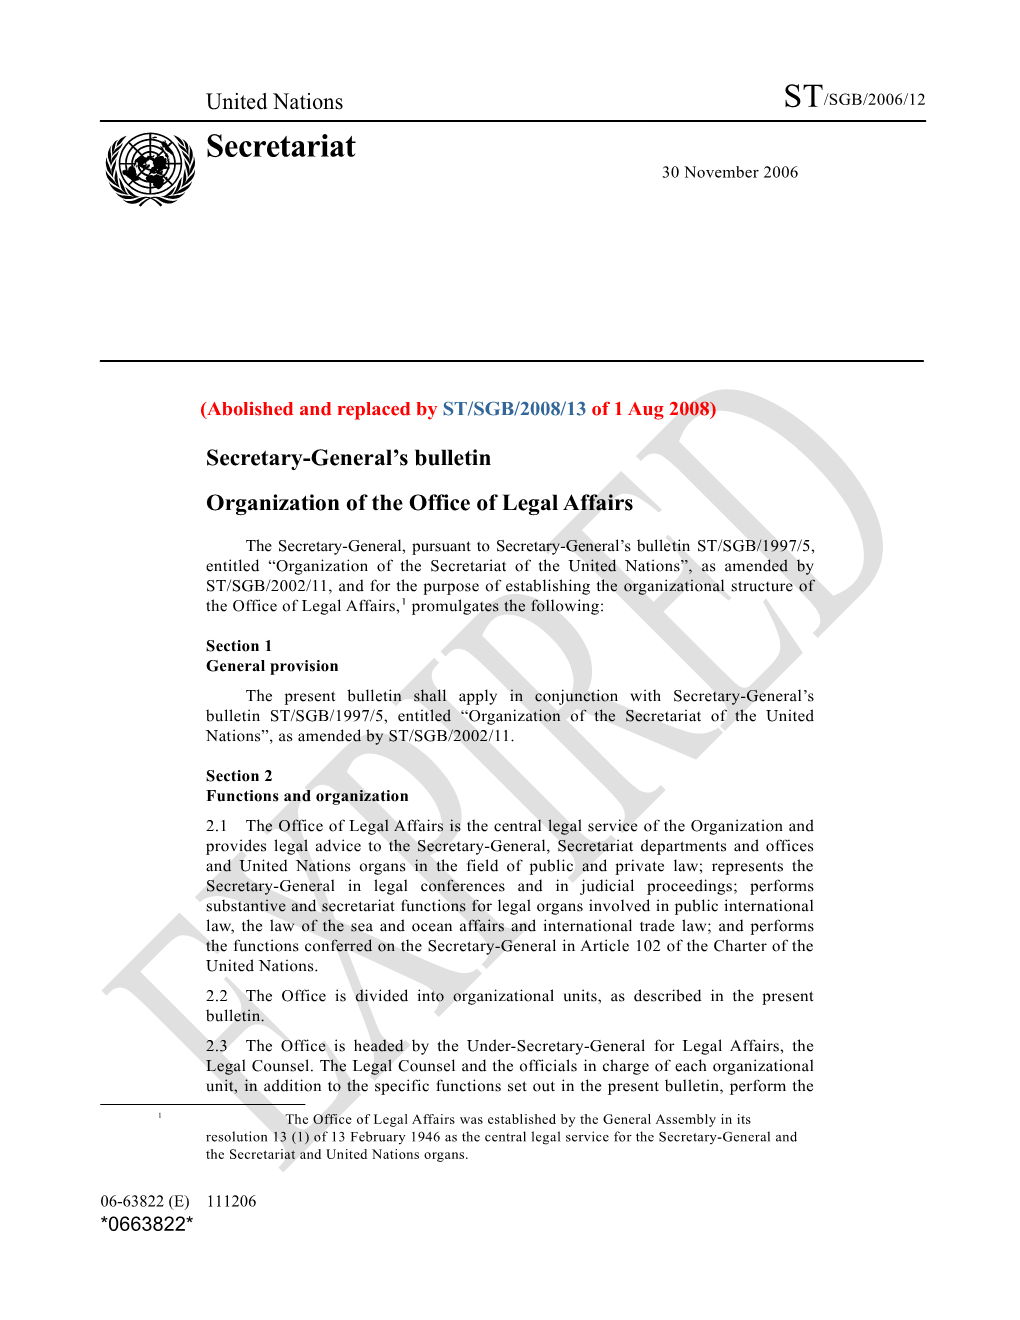 Organization of the Office of Legal Affairs